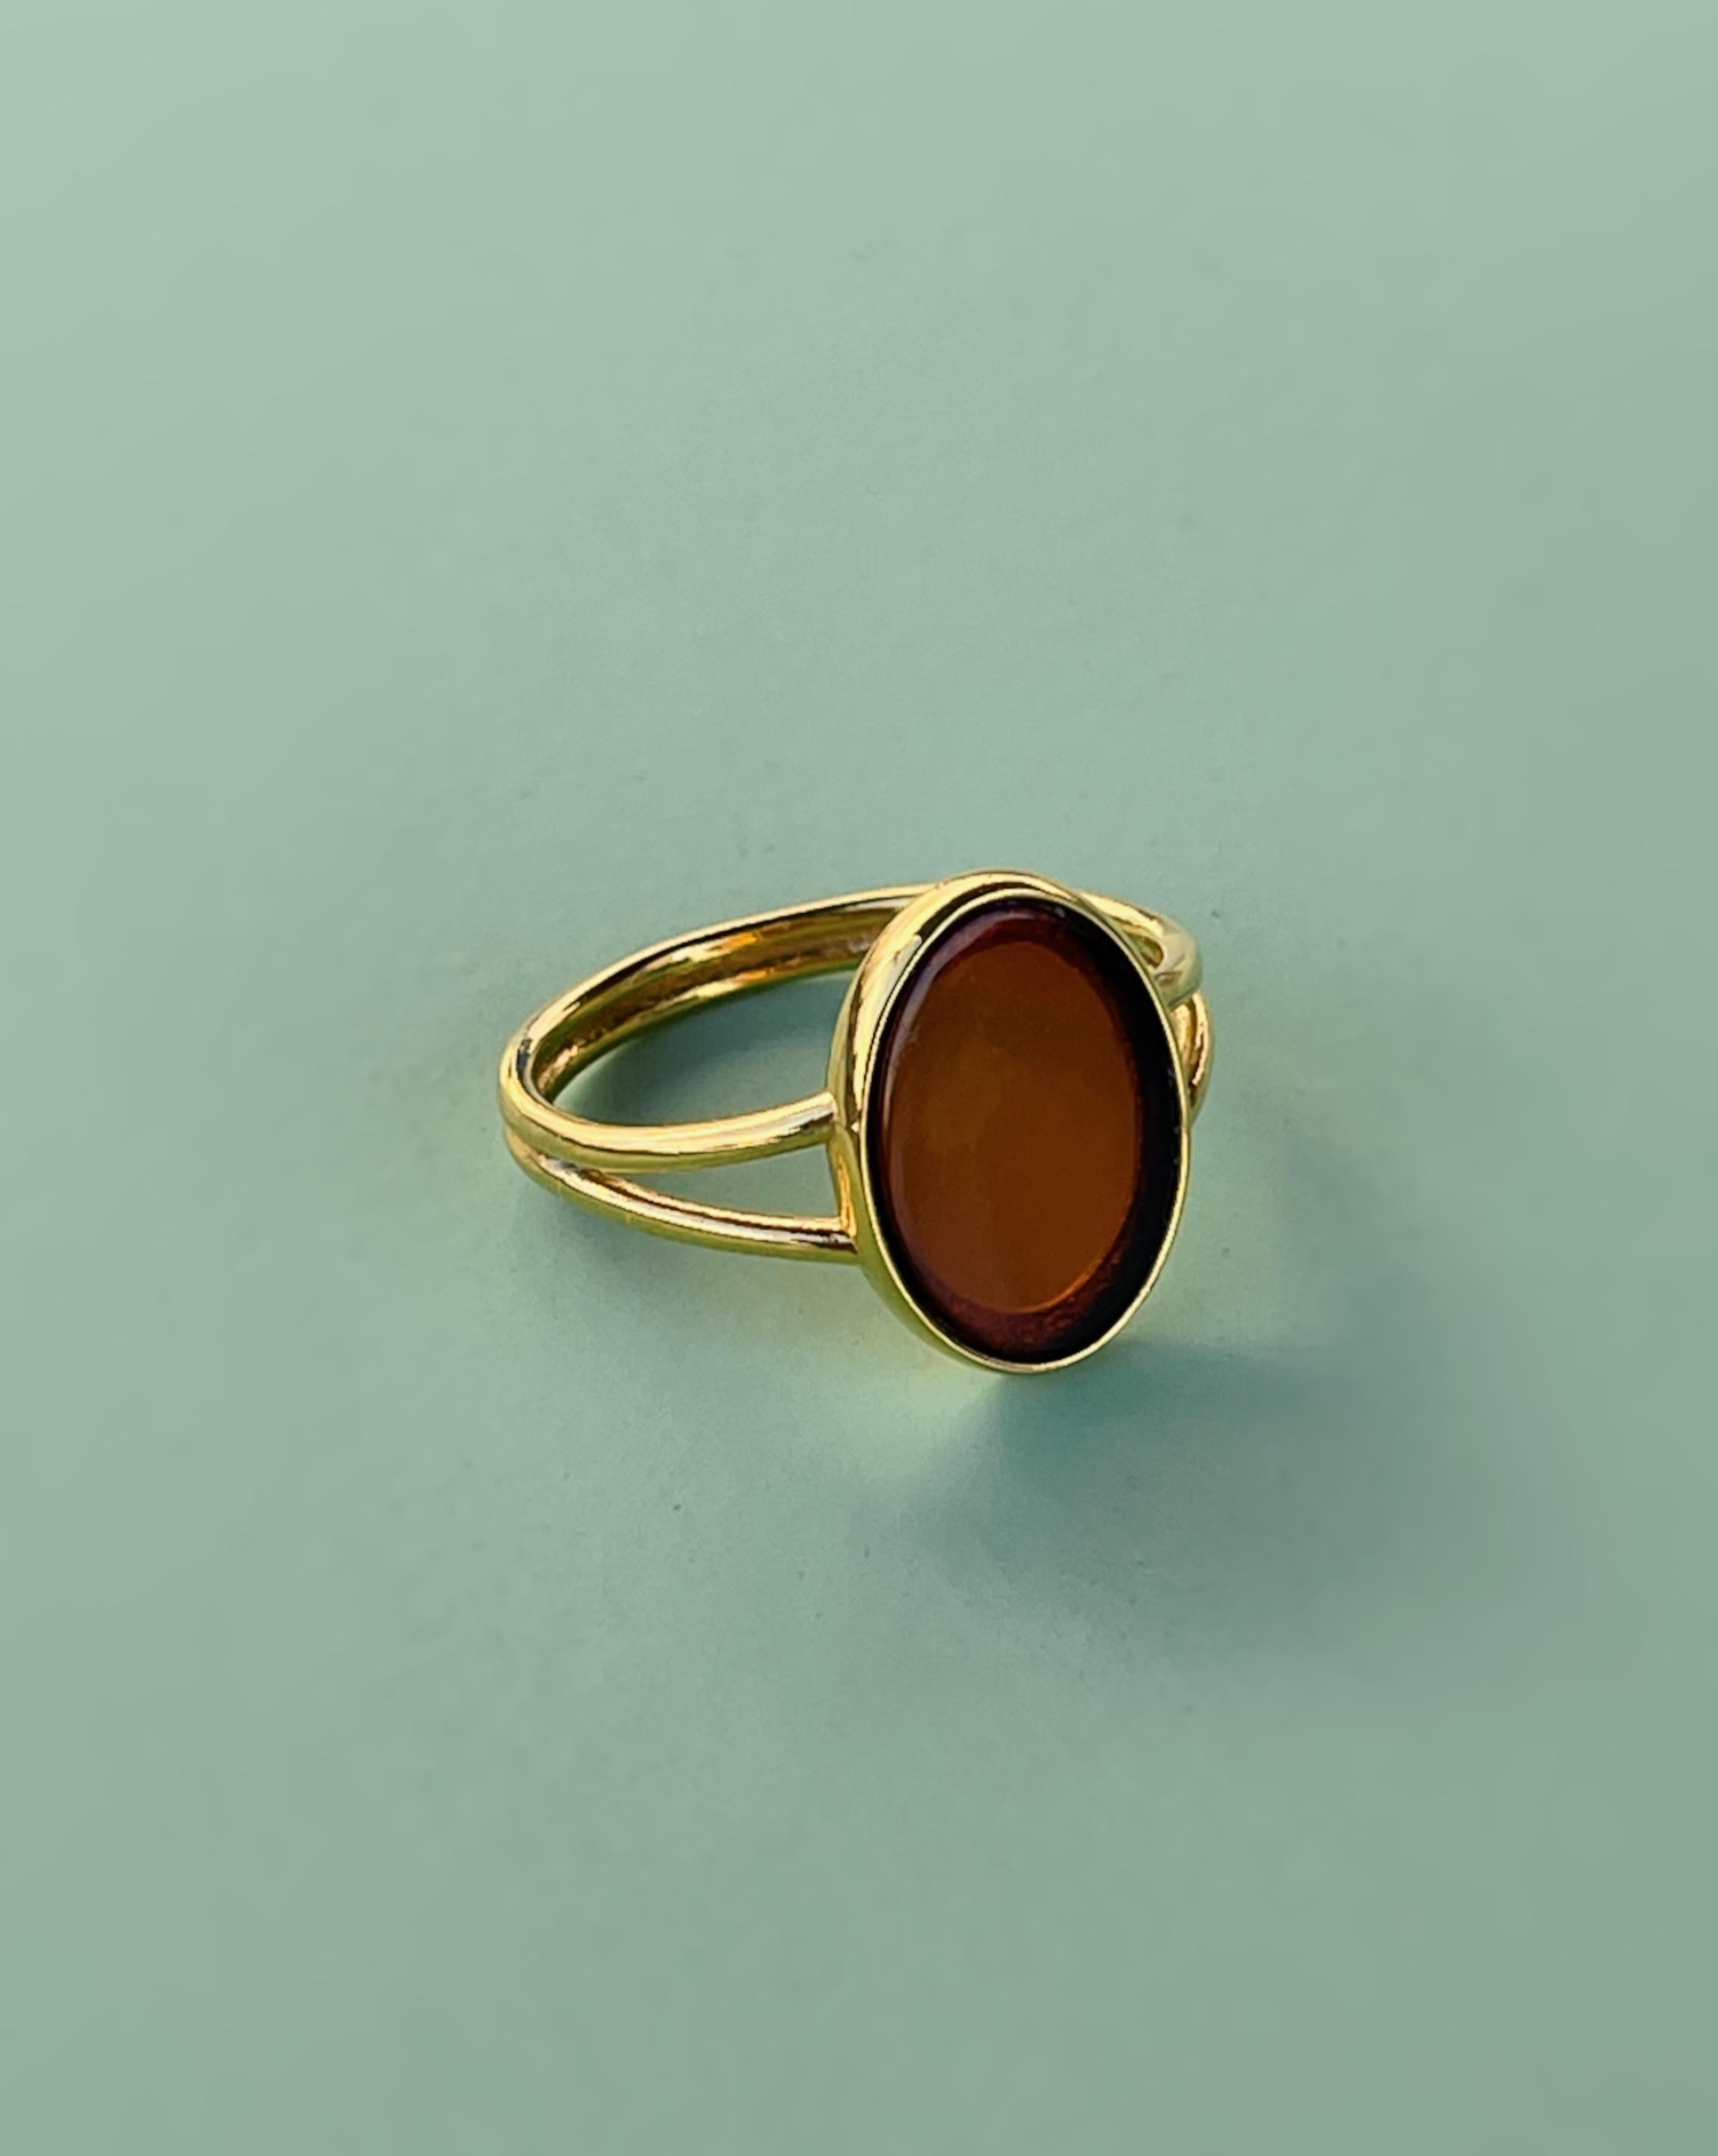 Baltic amber is a stone of happiness and creativity. It's a reminder of warm summer days and a refreshing sea breeze. Put this ring on and enjoy its sunny beauty. 
The ring is made of brass, plated with 24-carat gold. 
Size of the amber: 14mm length